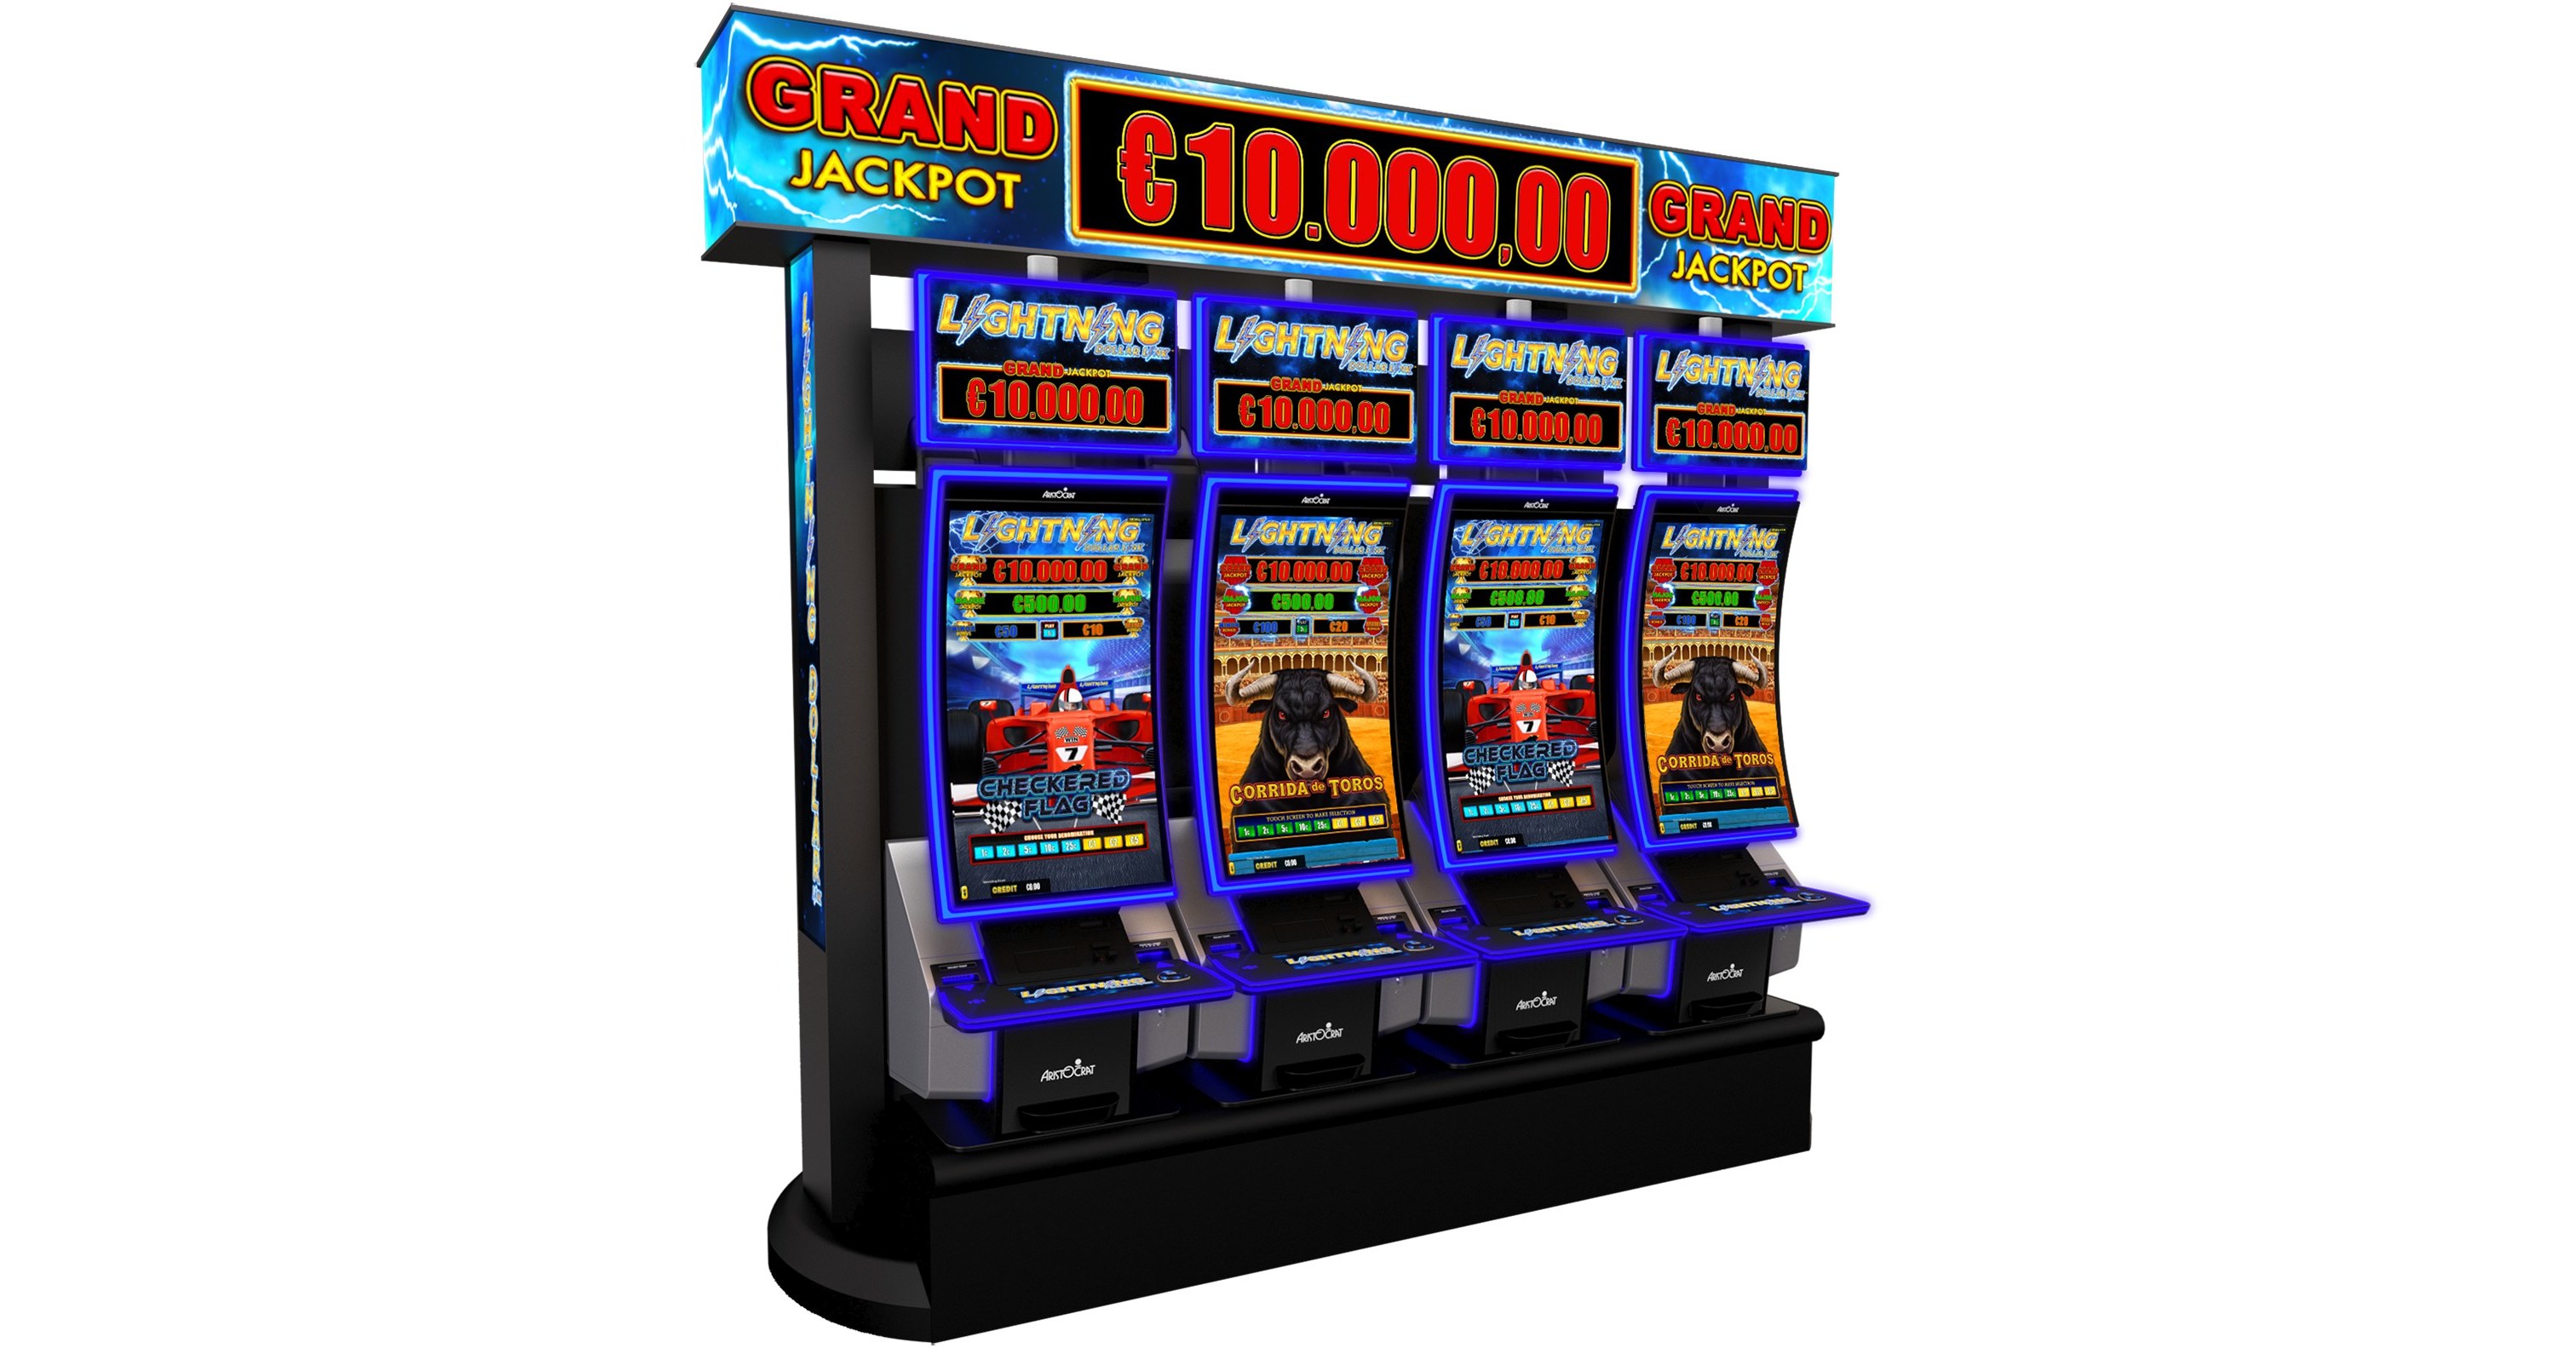 Aristocrat Gaming introduces New European For Sale Link Lineup